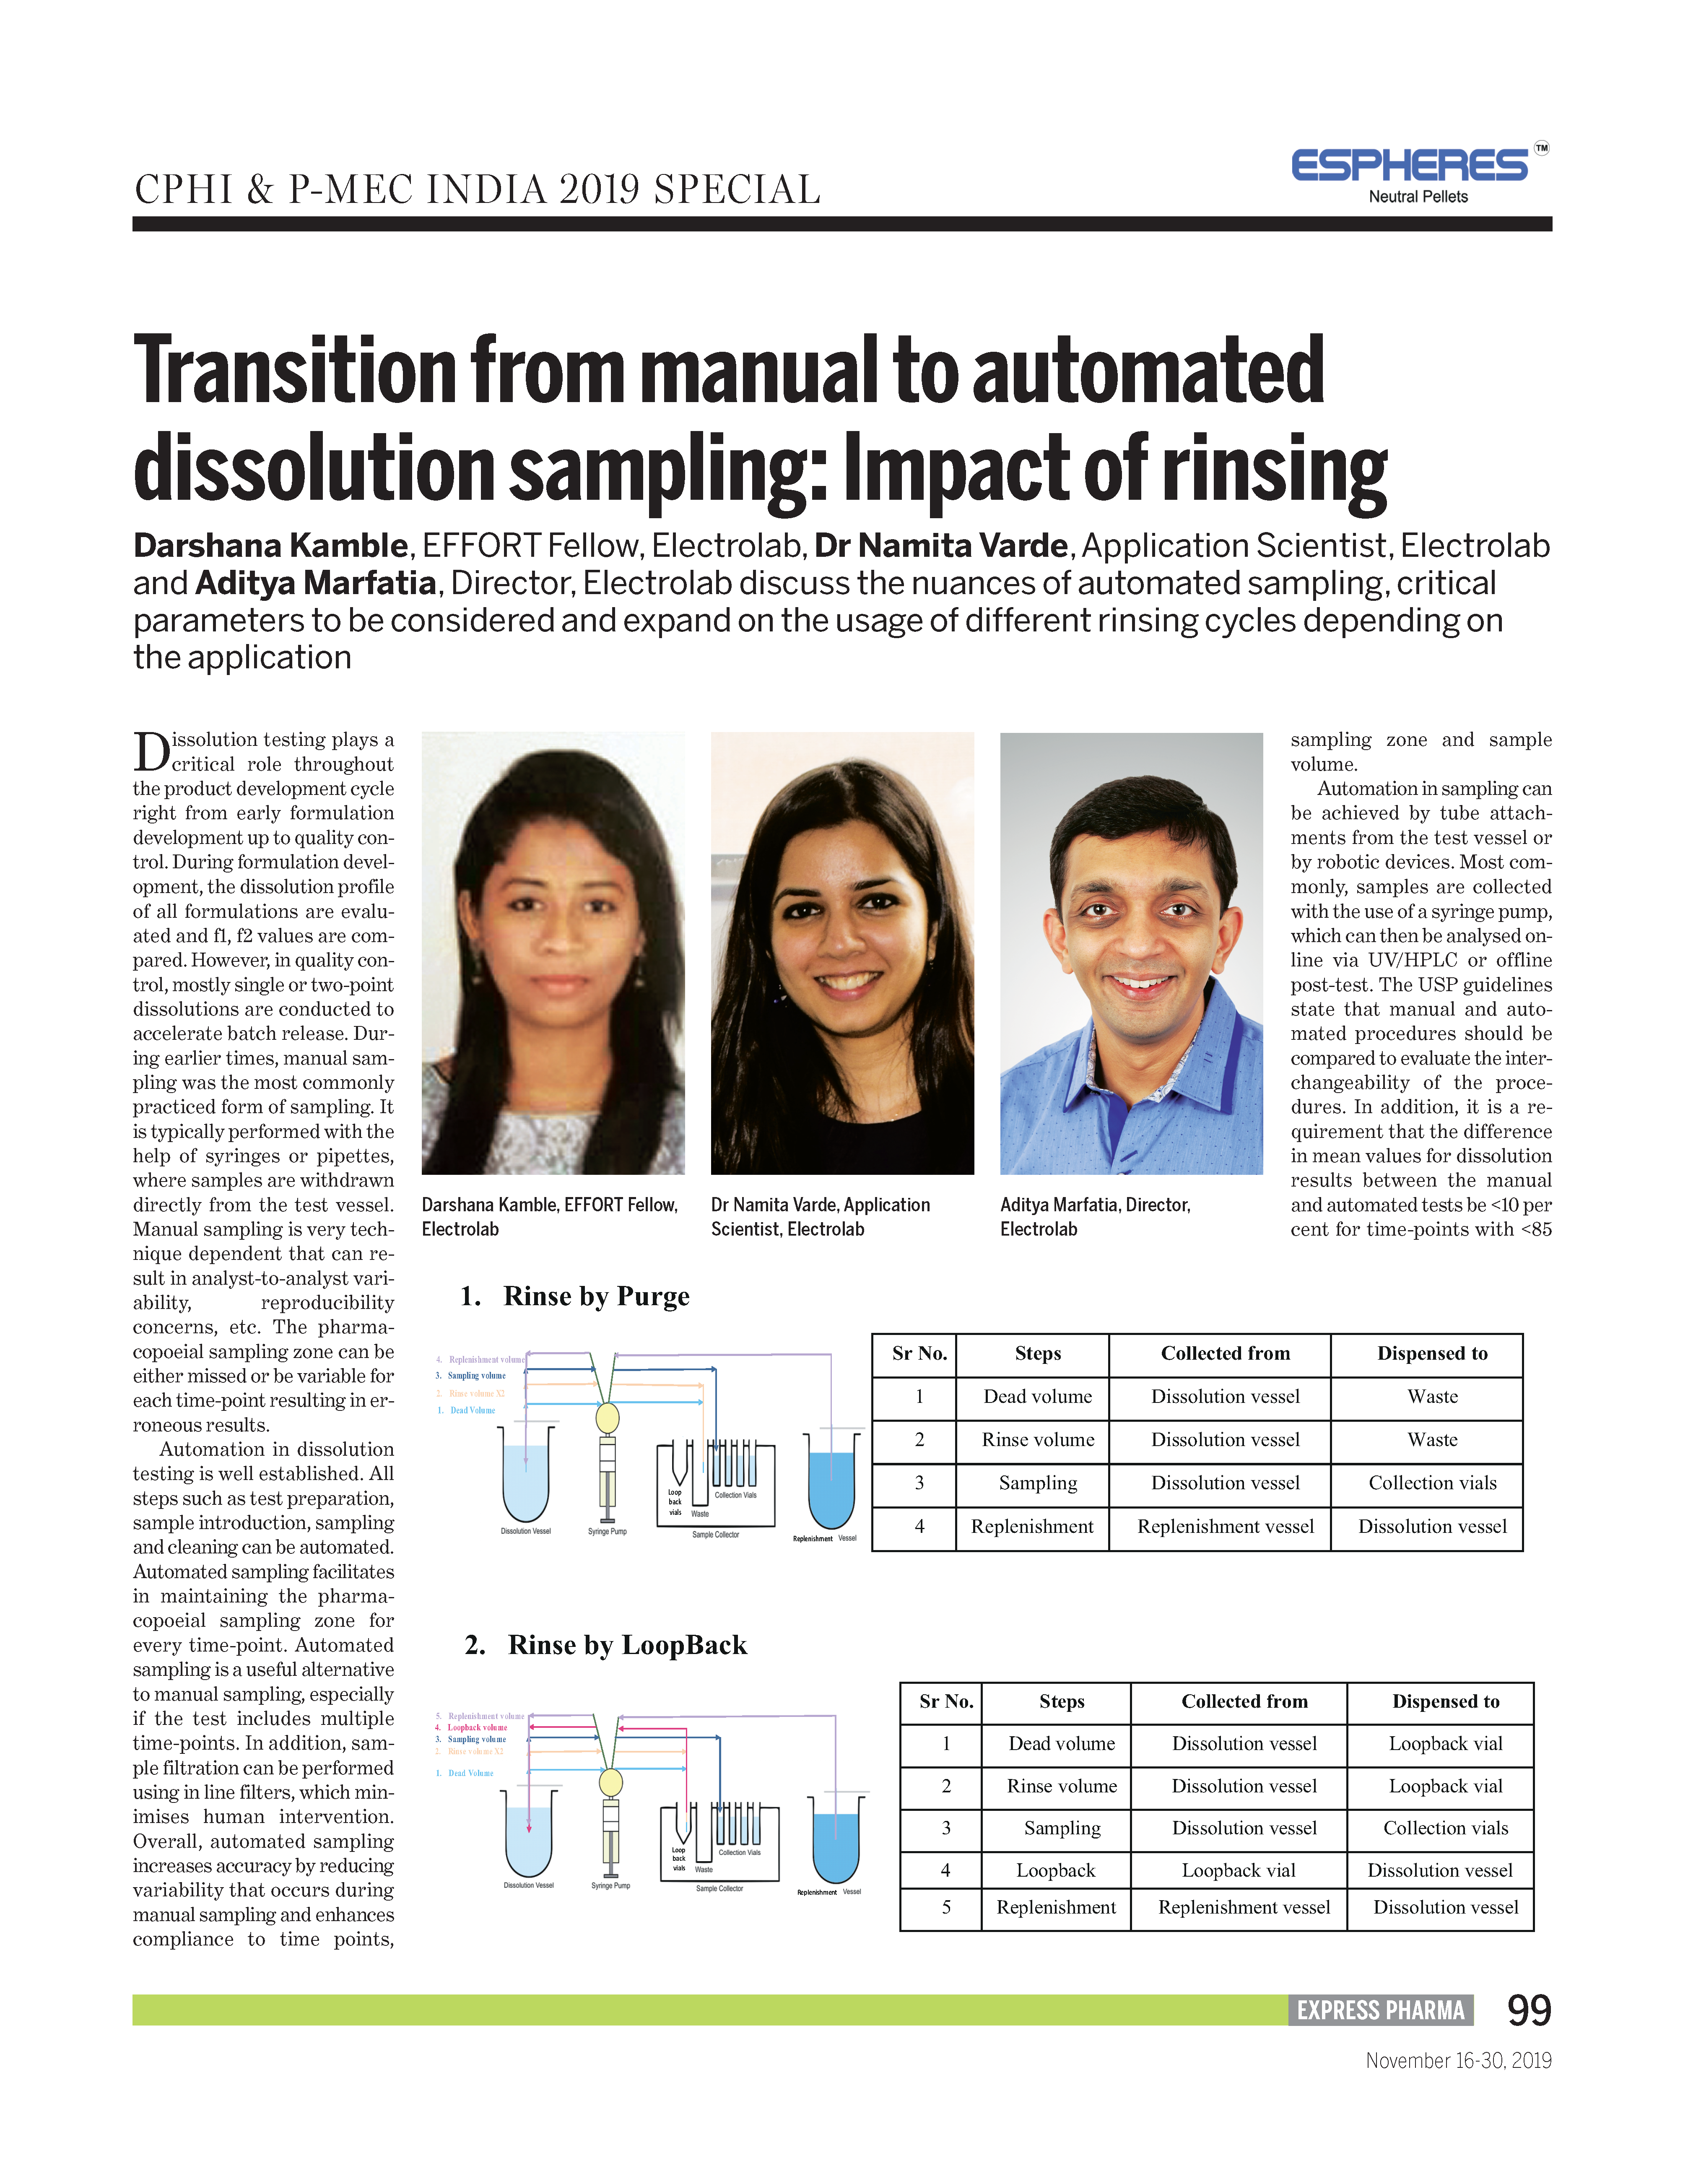 Transition from manual to automated dissolution sampling: Impact of rinsing